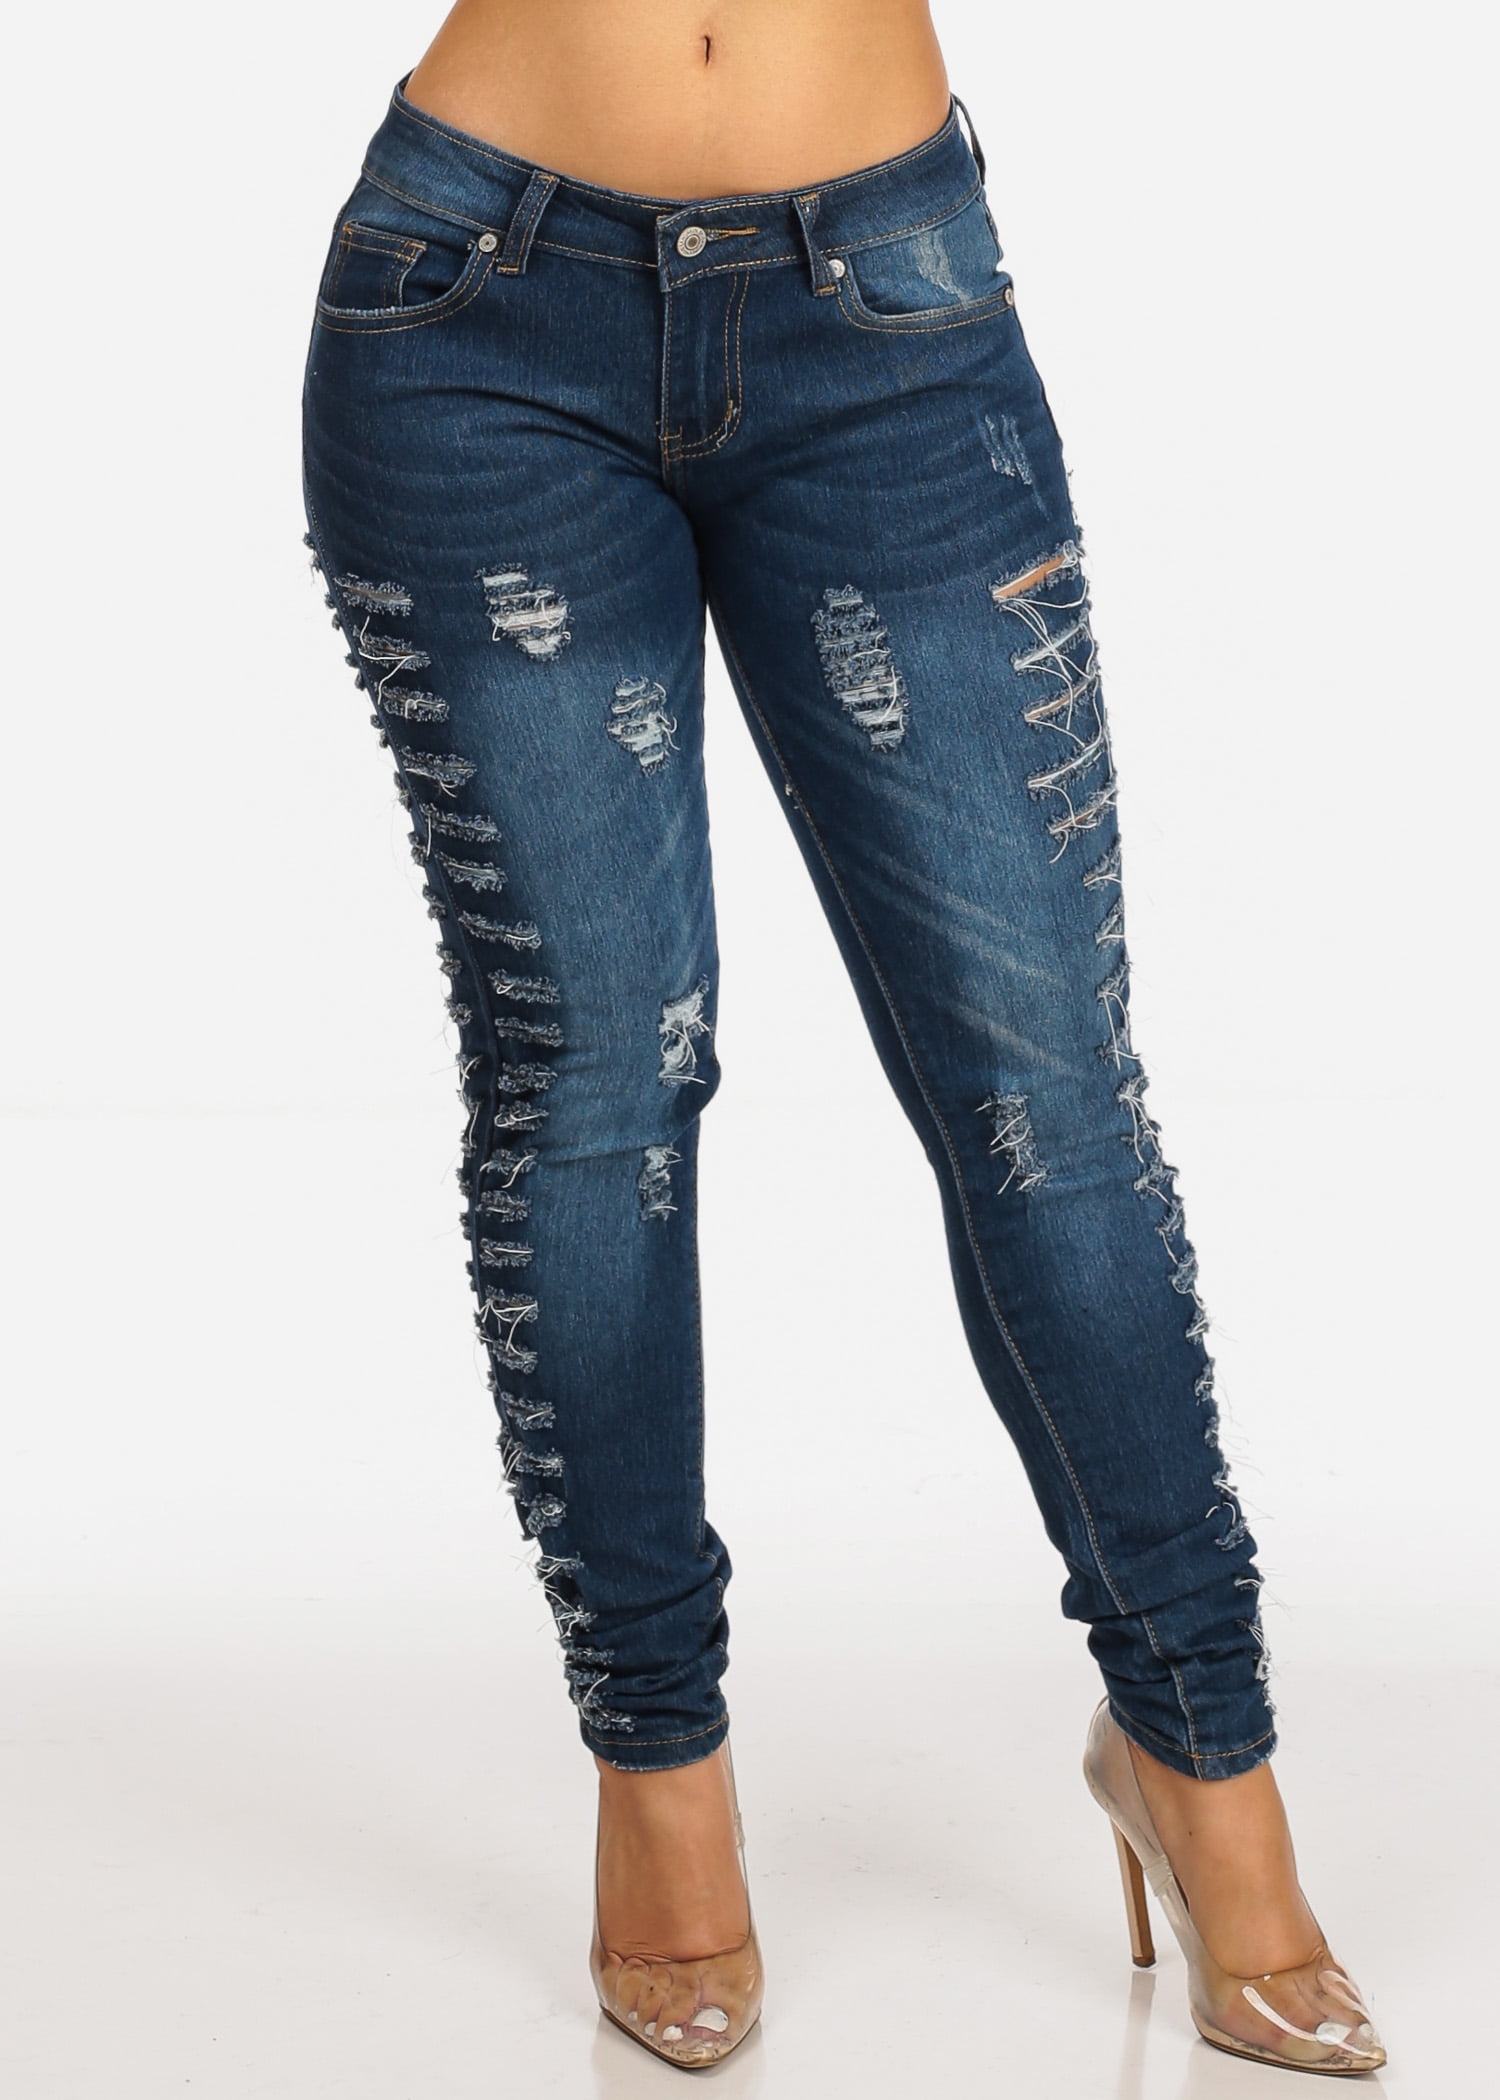 women's low rise distressed jeans